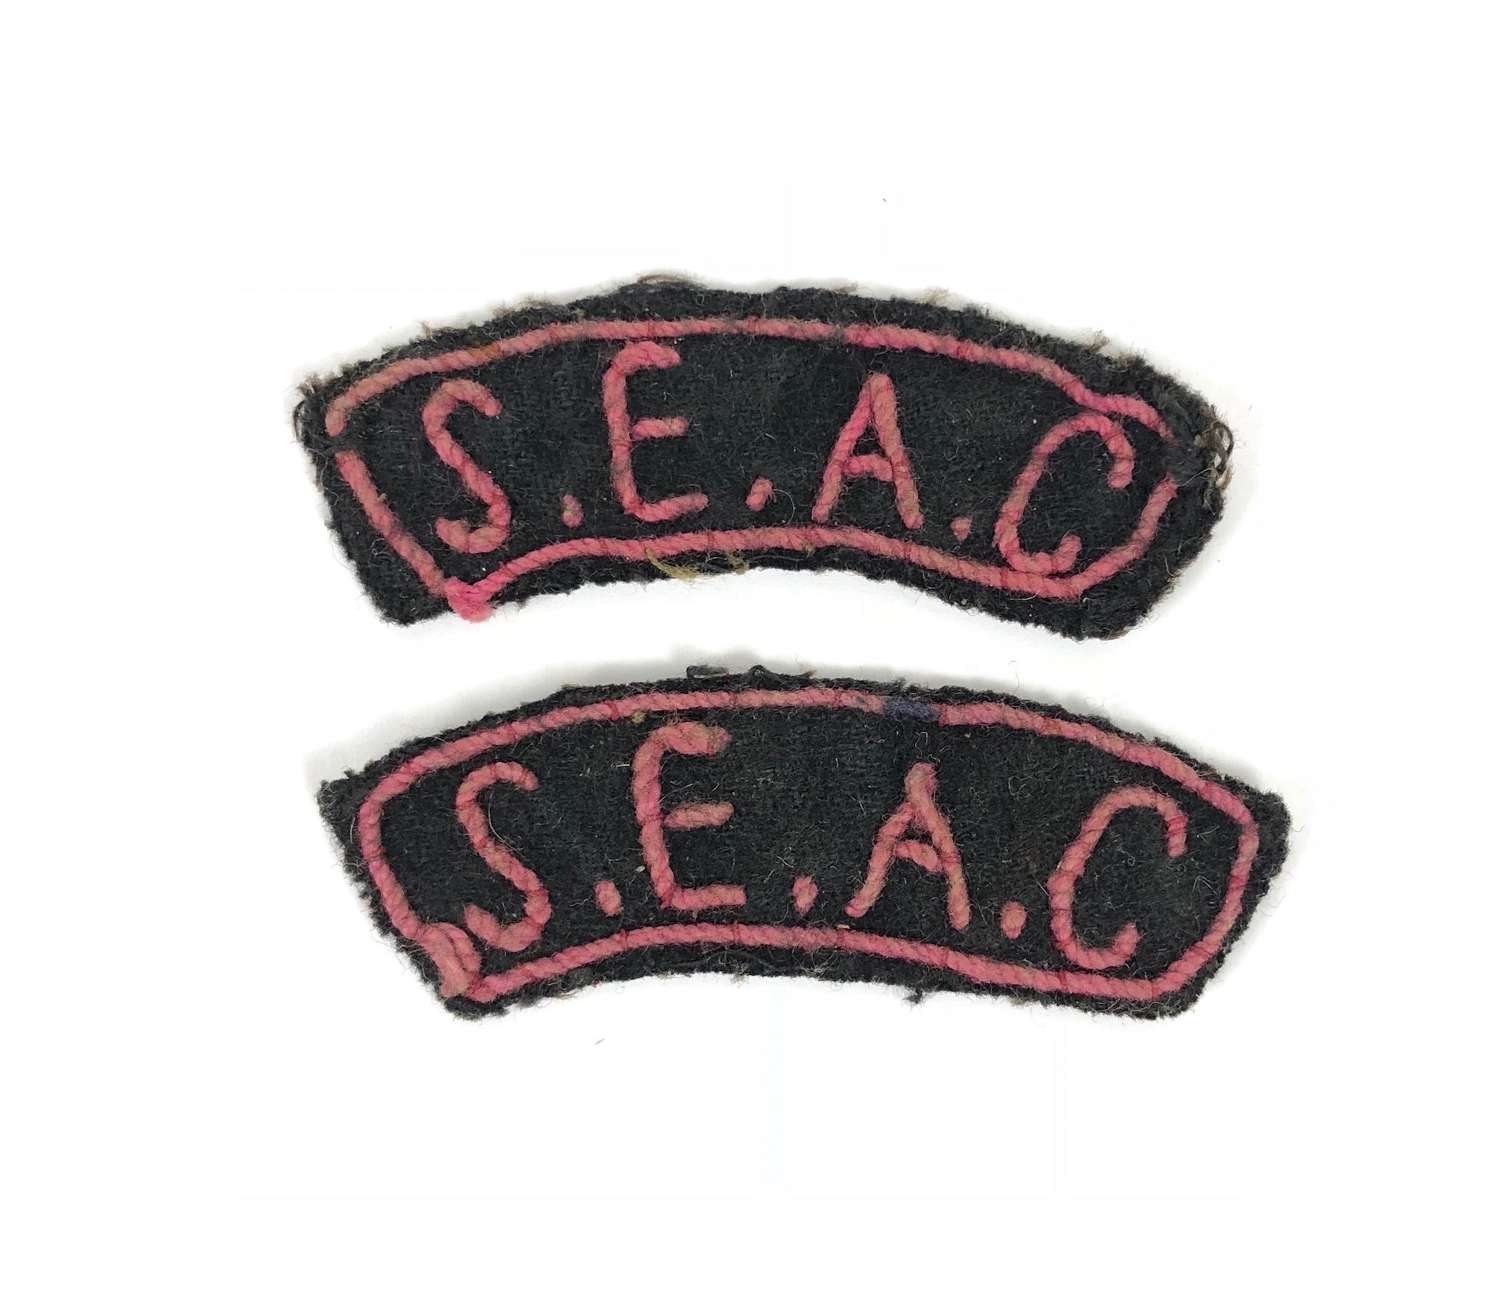 SEAC South East Asia Command Cloth Shoulder Titles.